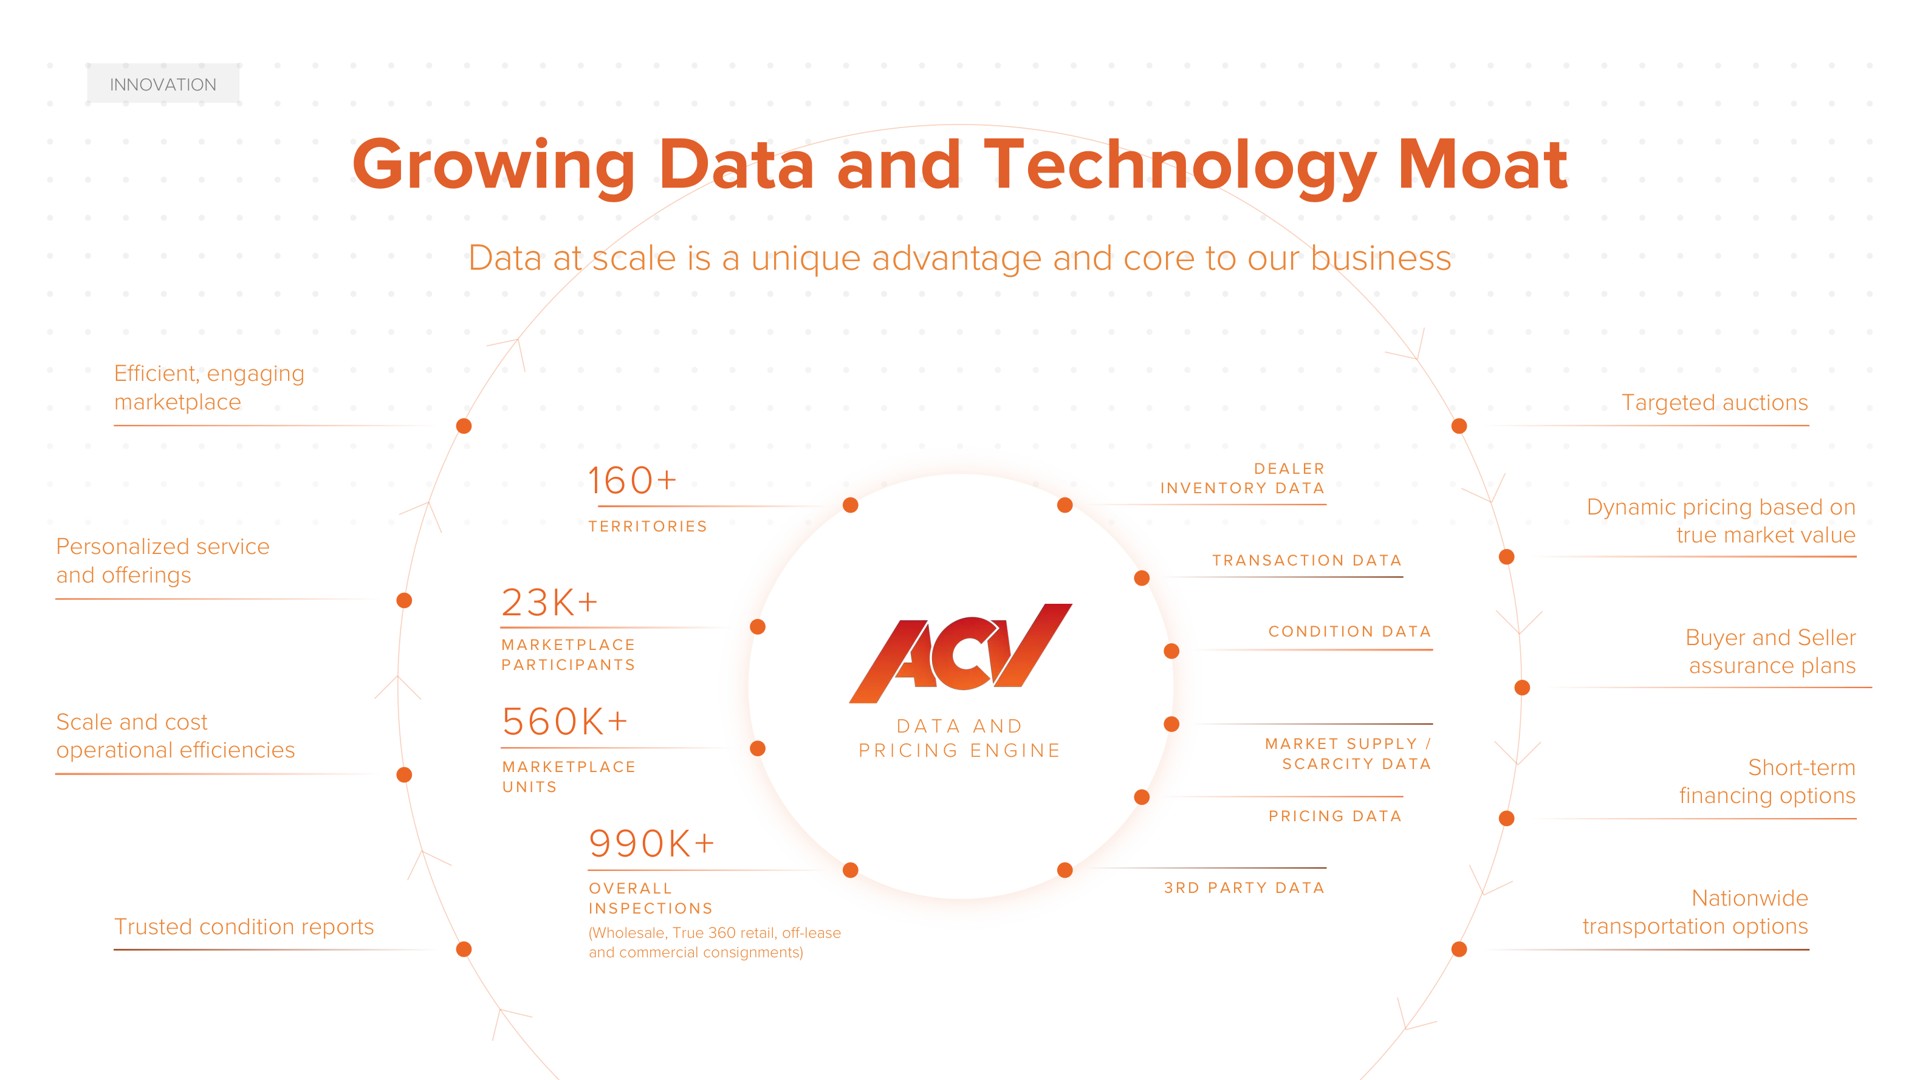 growing data and technology moat at scale is a unique advantage core to our business oho | ACV Auctions